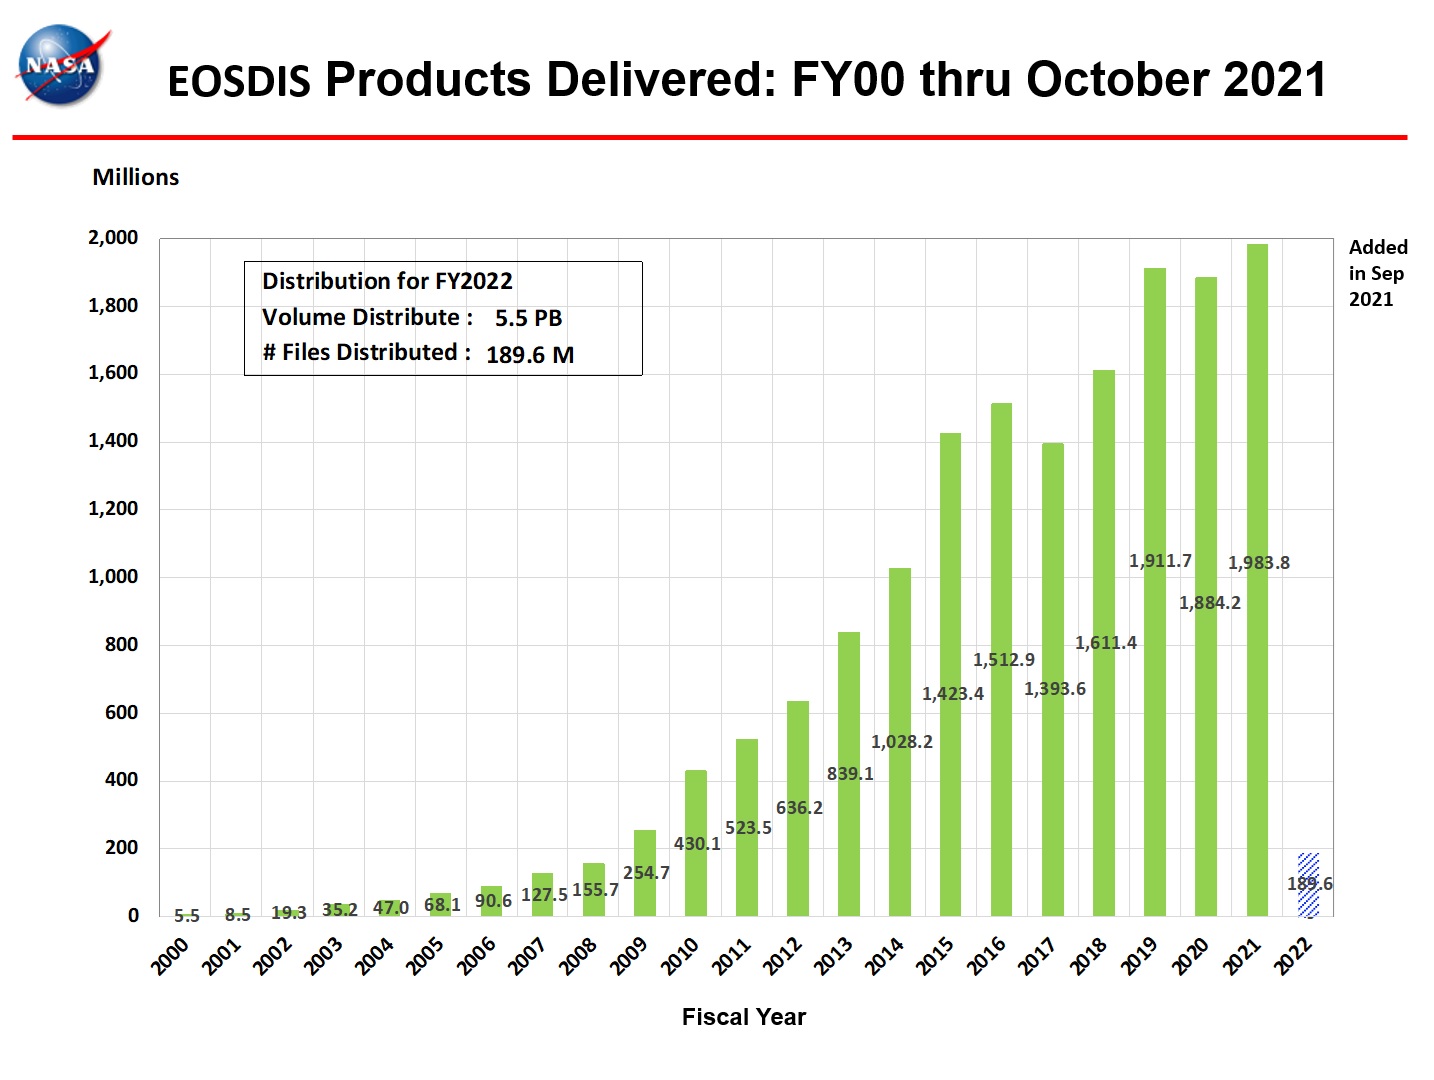 EOSDIS Products Delivered FY00 - October 2021